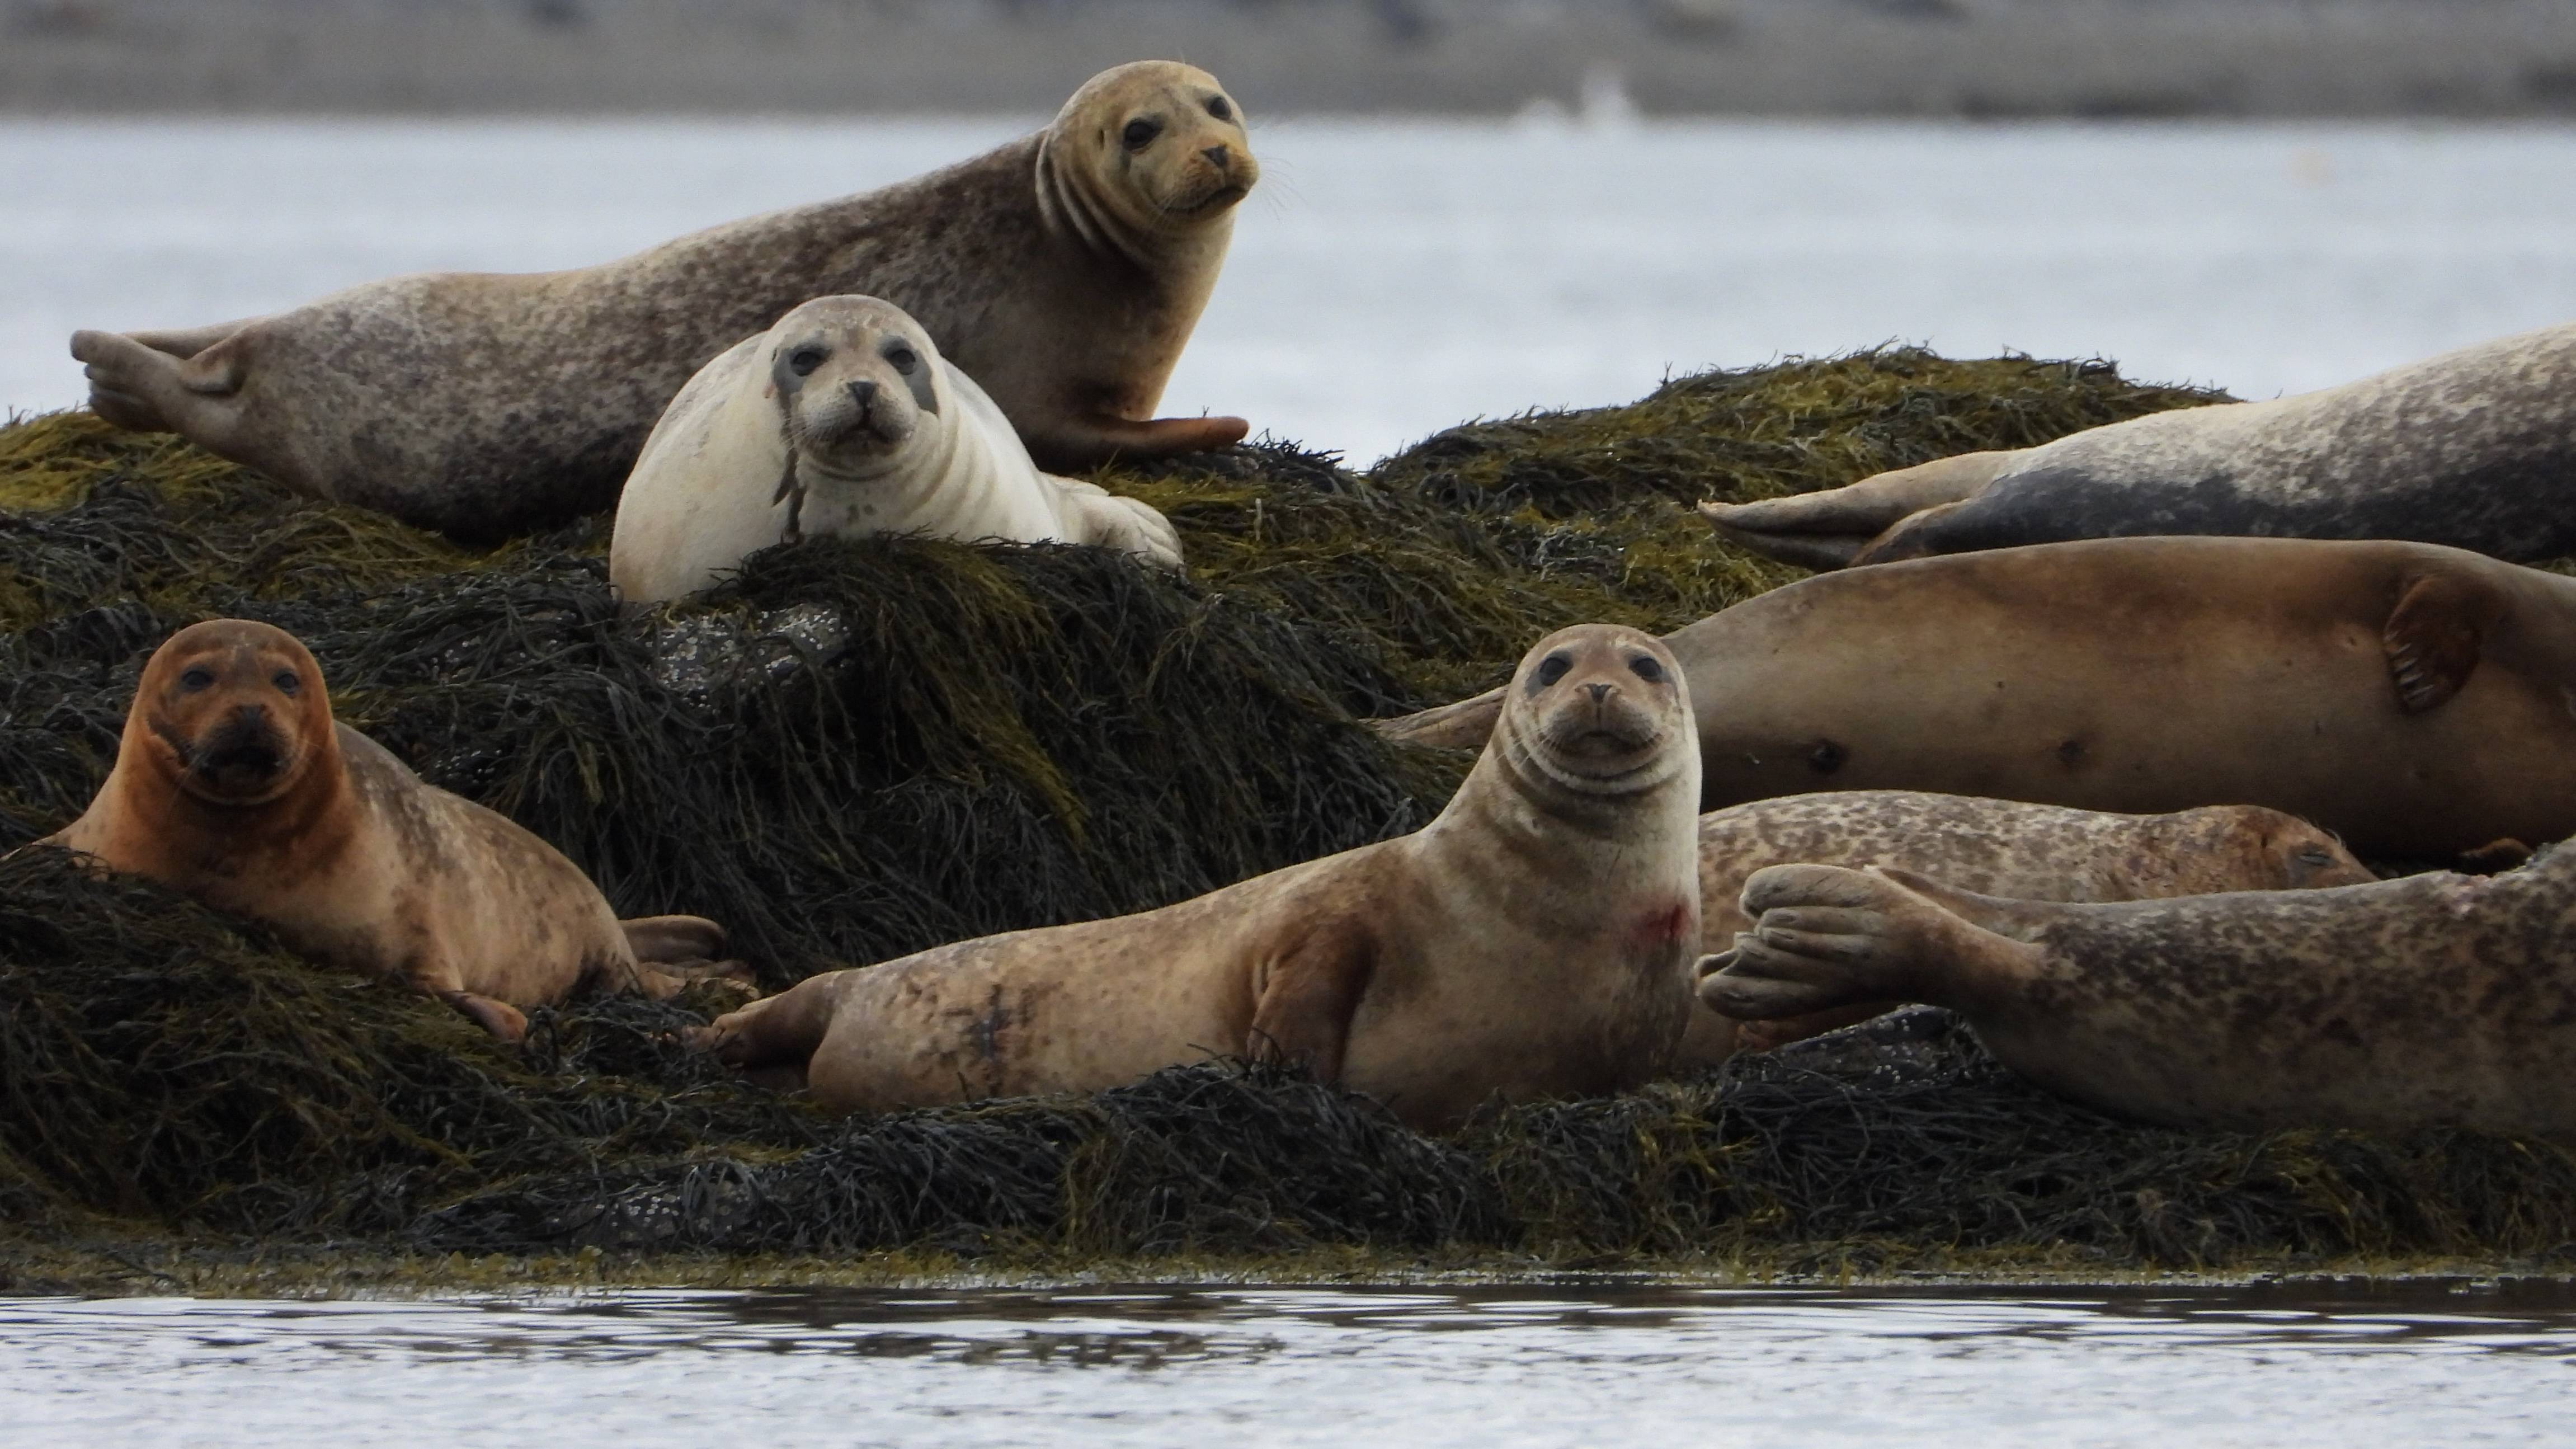 Harbor seals at Casco Bay haul-out site